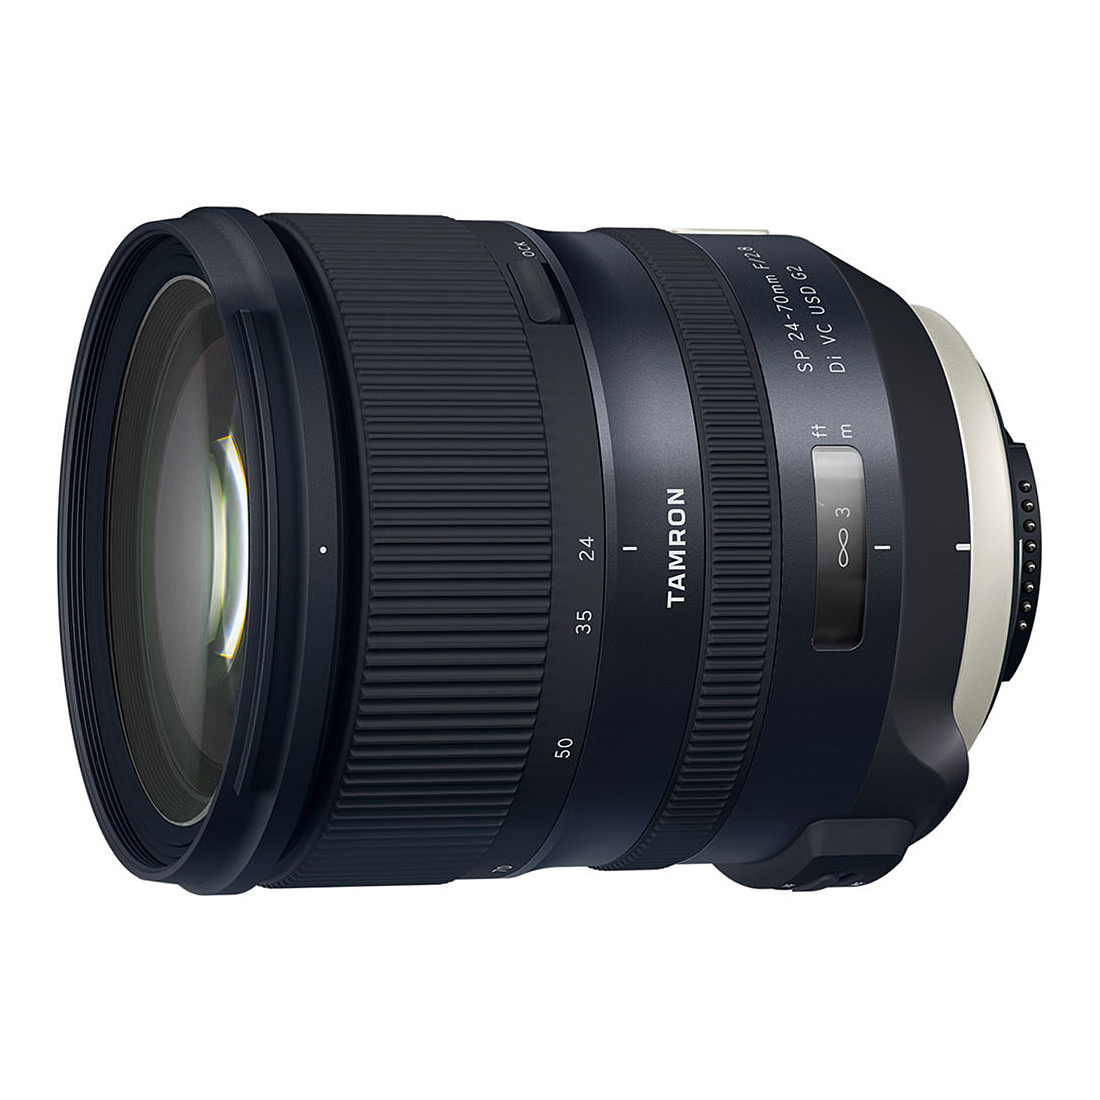 Tamron SP 24-70mm f/2.8 Di VC USD G2 - Photography Life